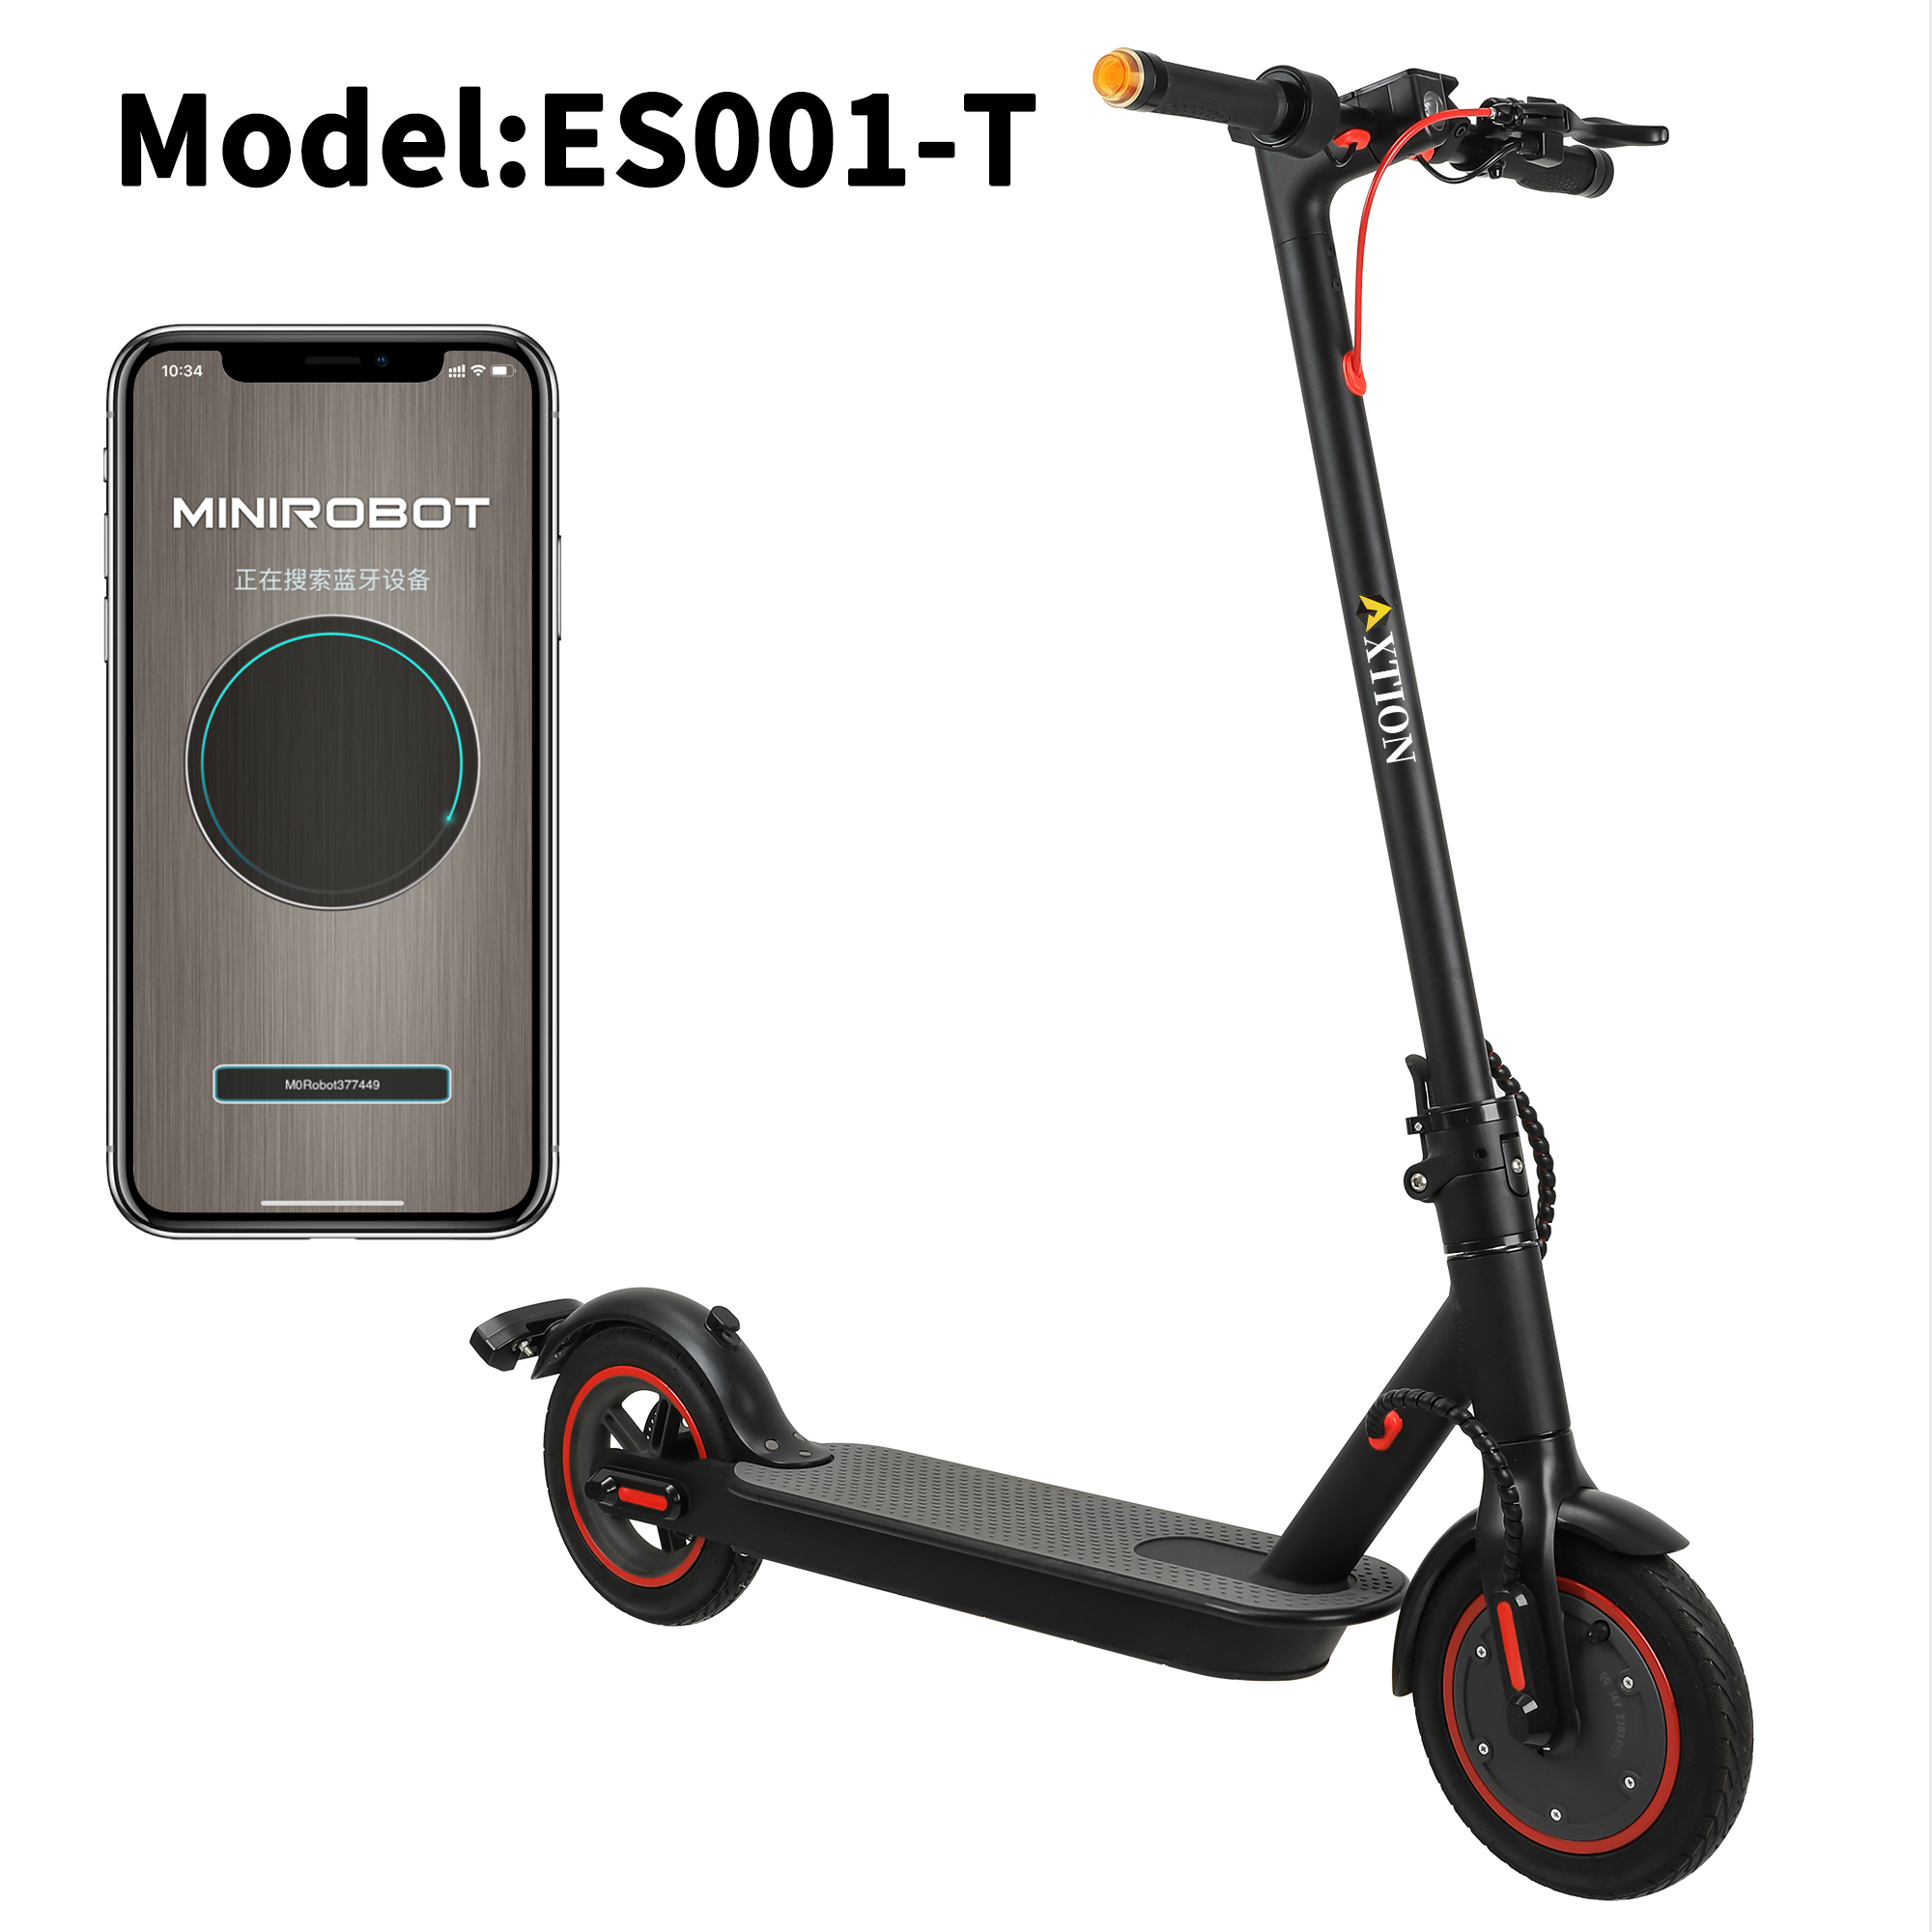 NEW* ES001-T Electric Scooter 35KM Speed with turning signals, Promotional Price*